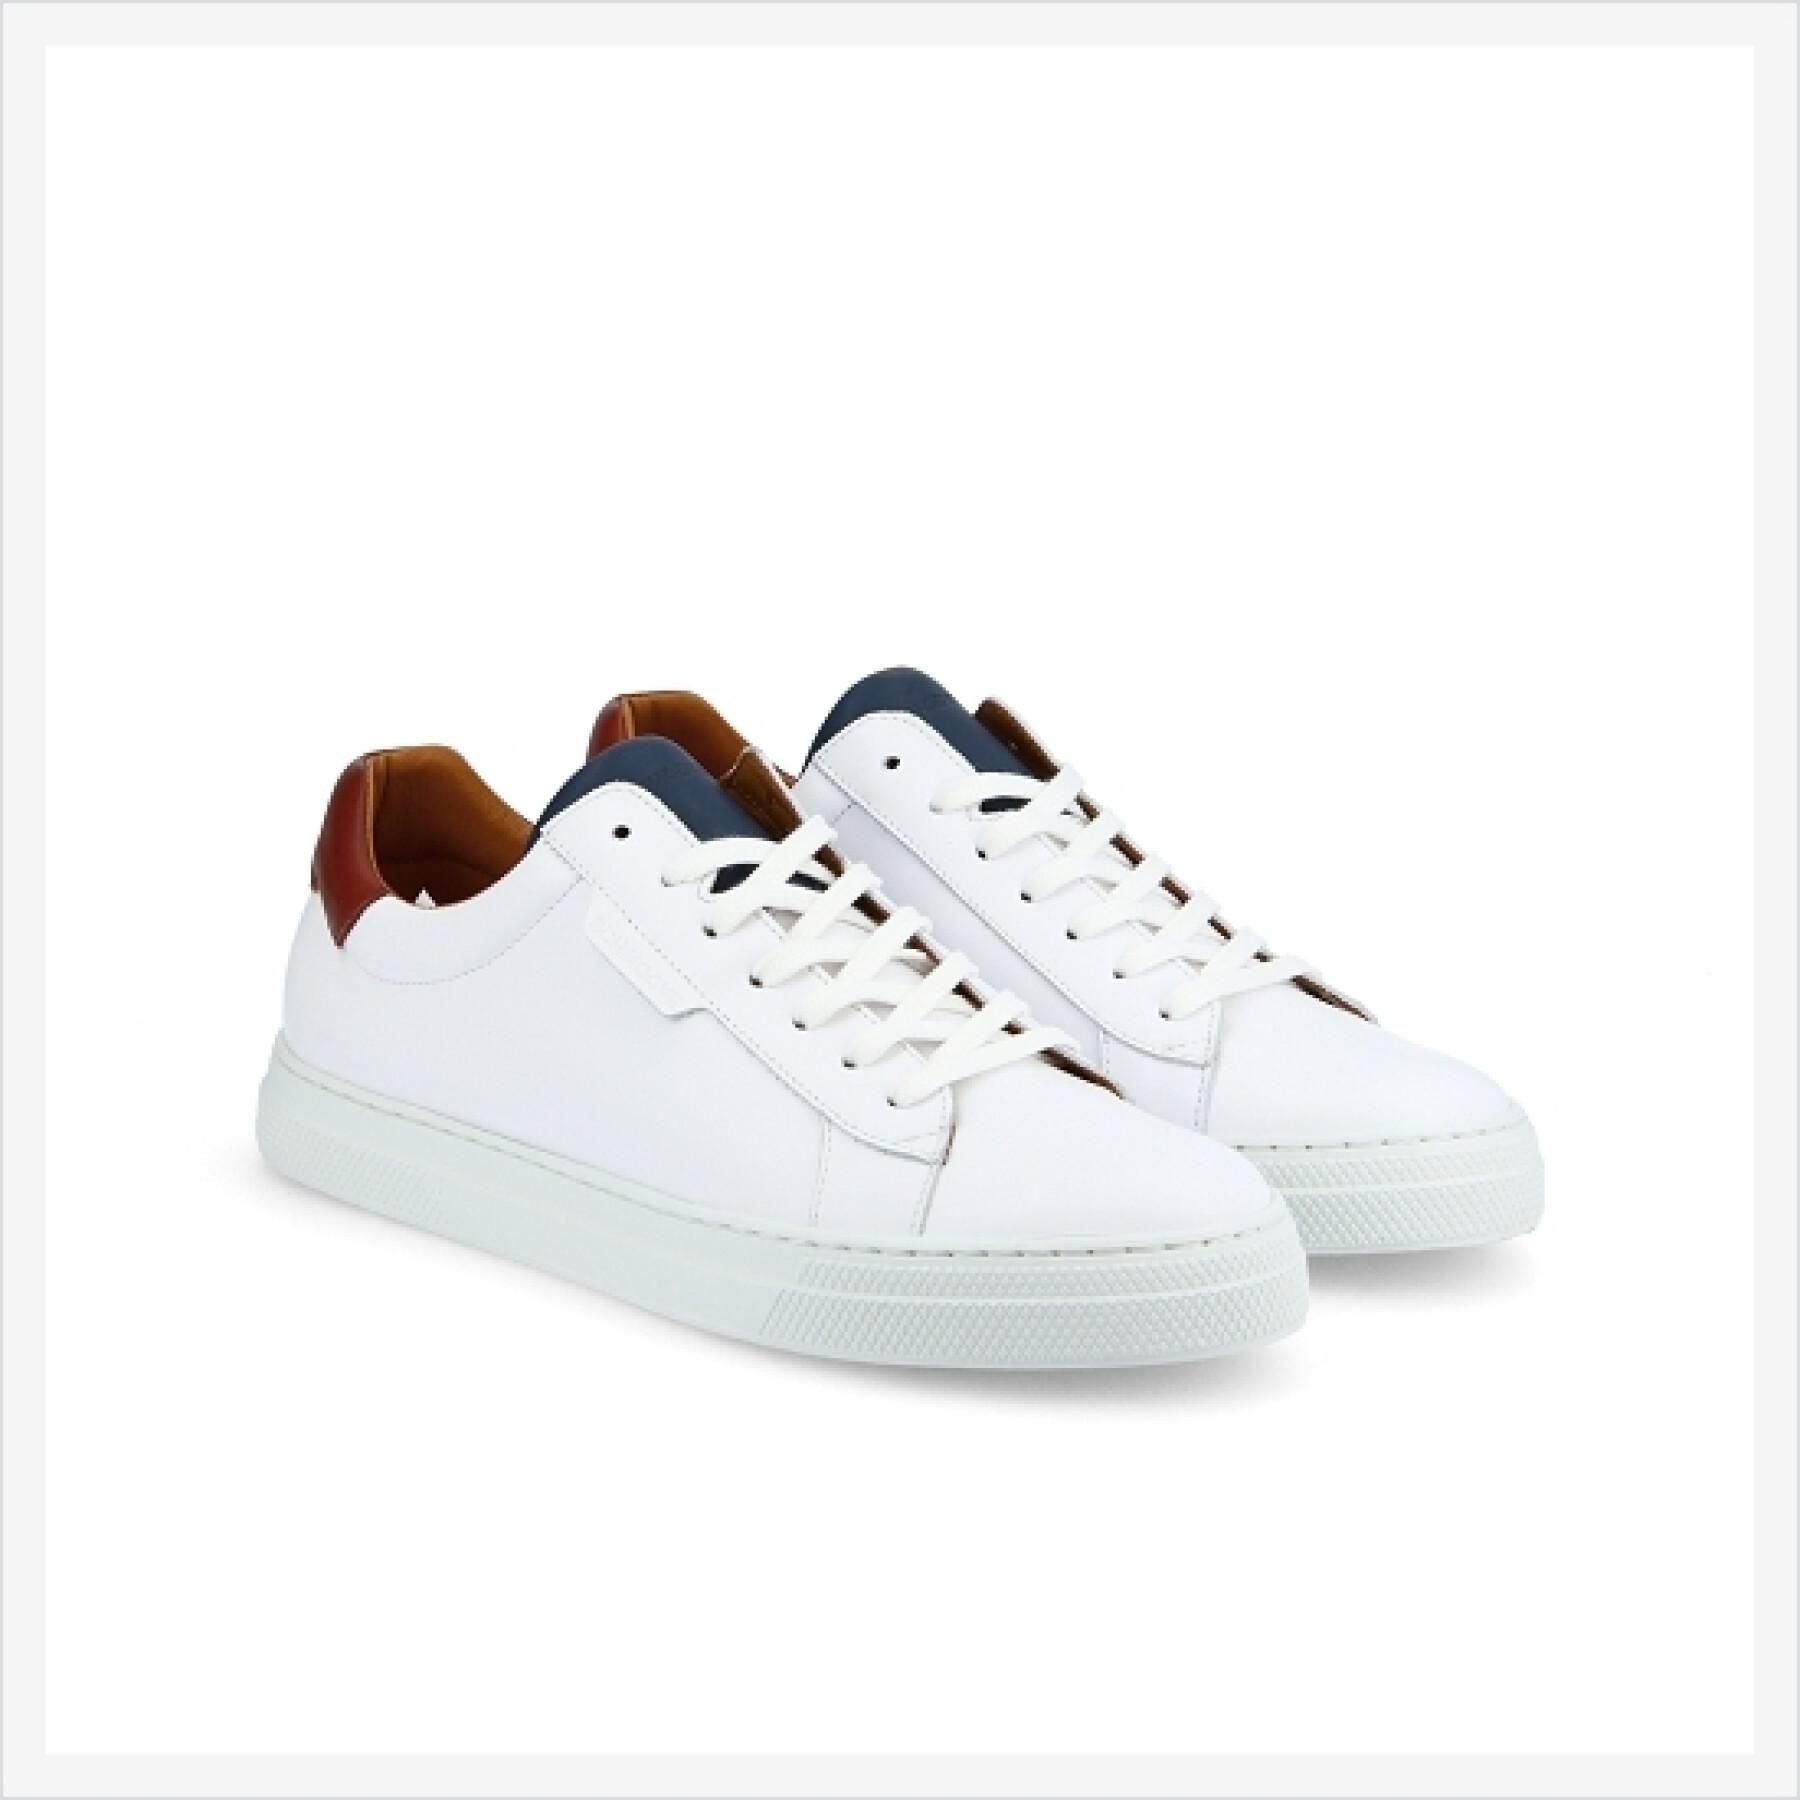 Sneakers Schmoove Spark Clay